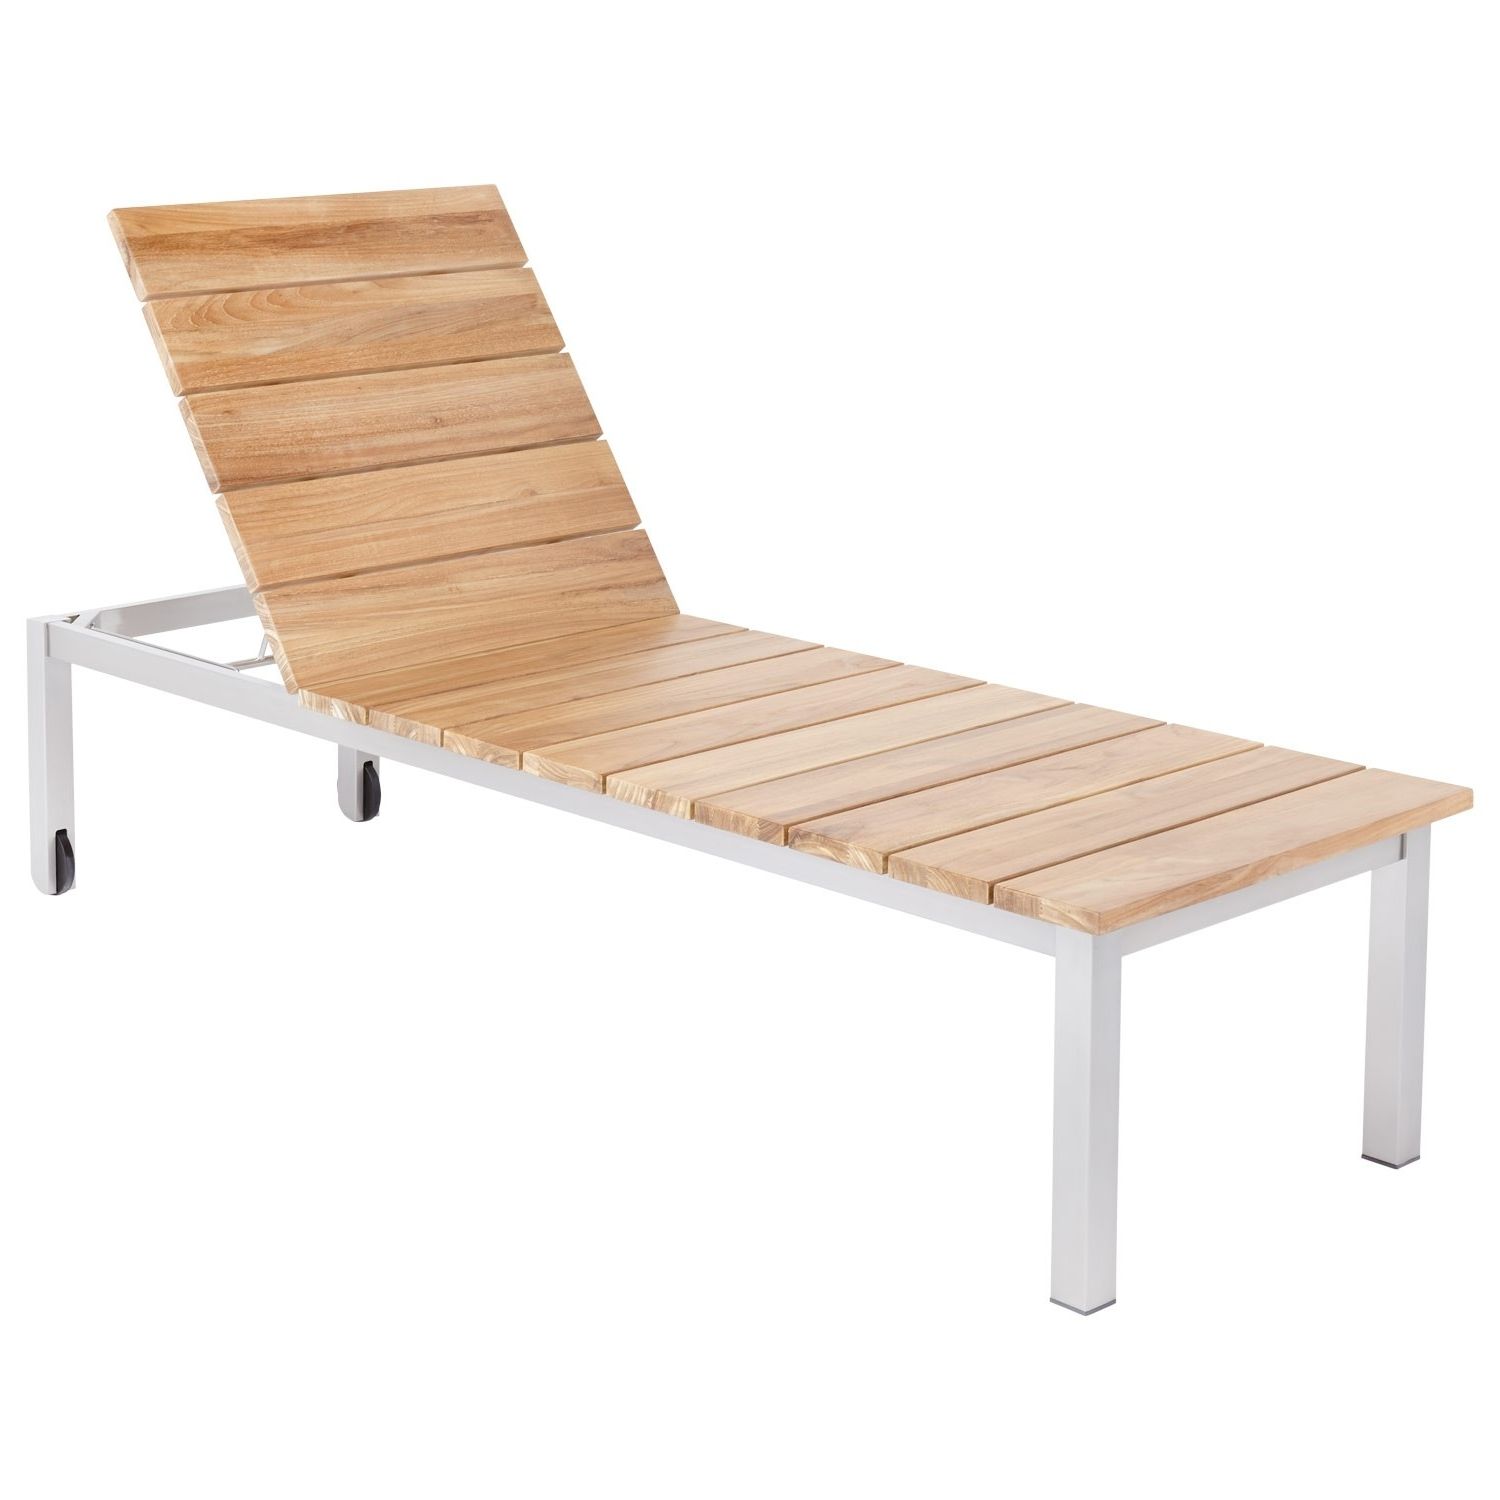 Most Recent Macon Teak Outdoor Chaise Lounge Chair – Natural Teak – Outdoor Throughout Teak Chaise Lounges (View 3 of 15)